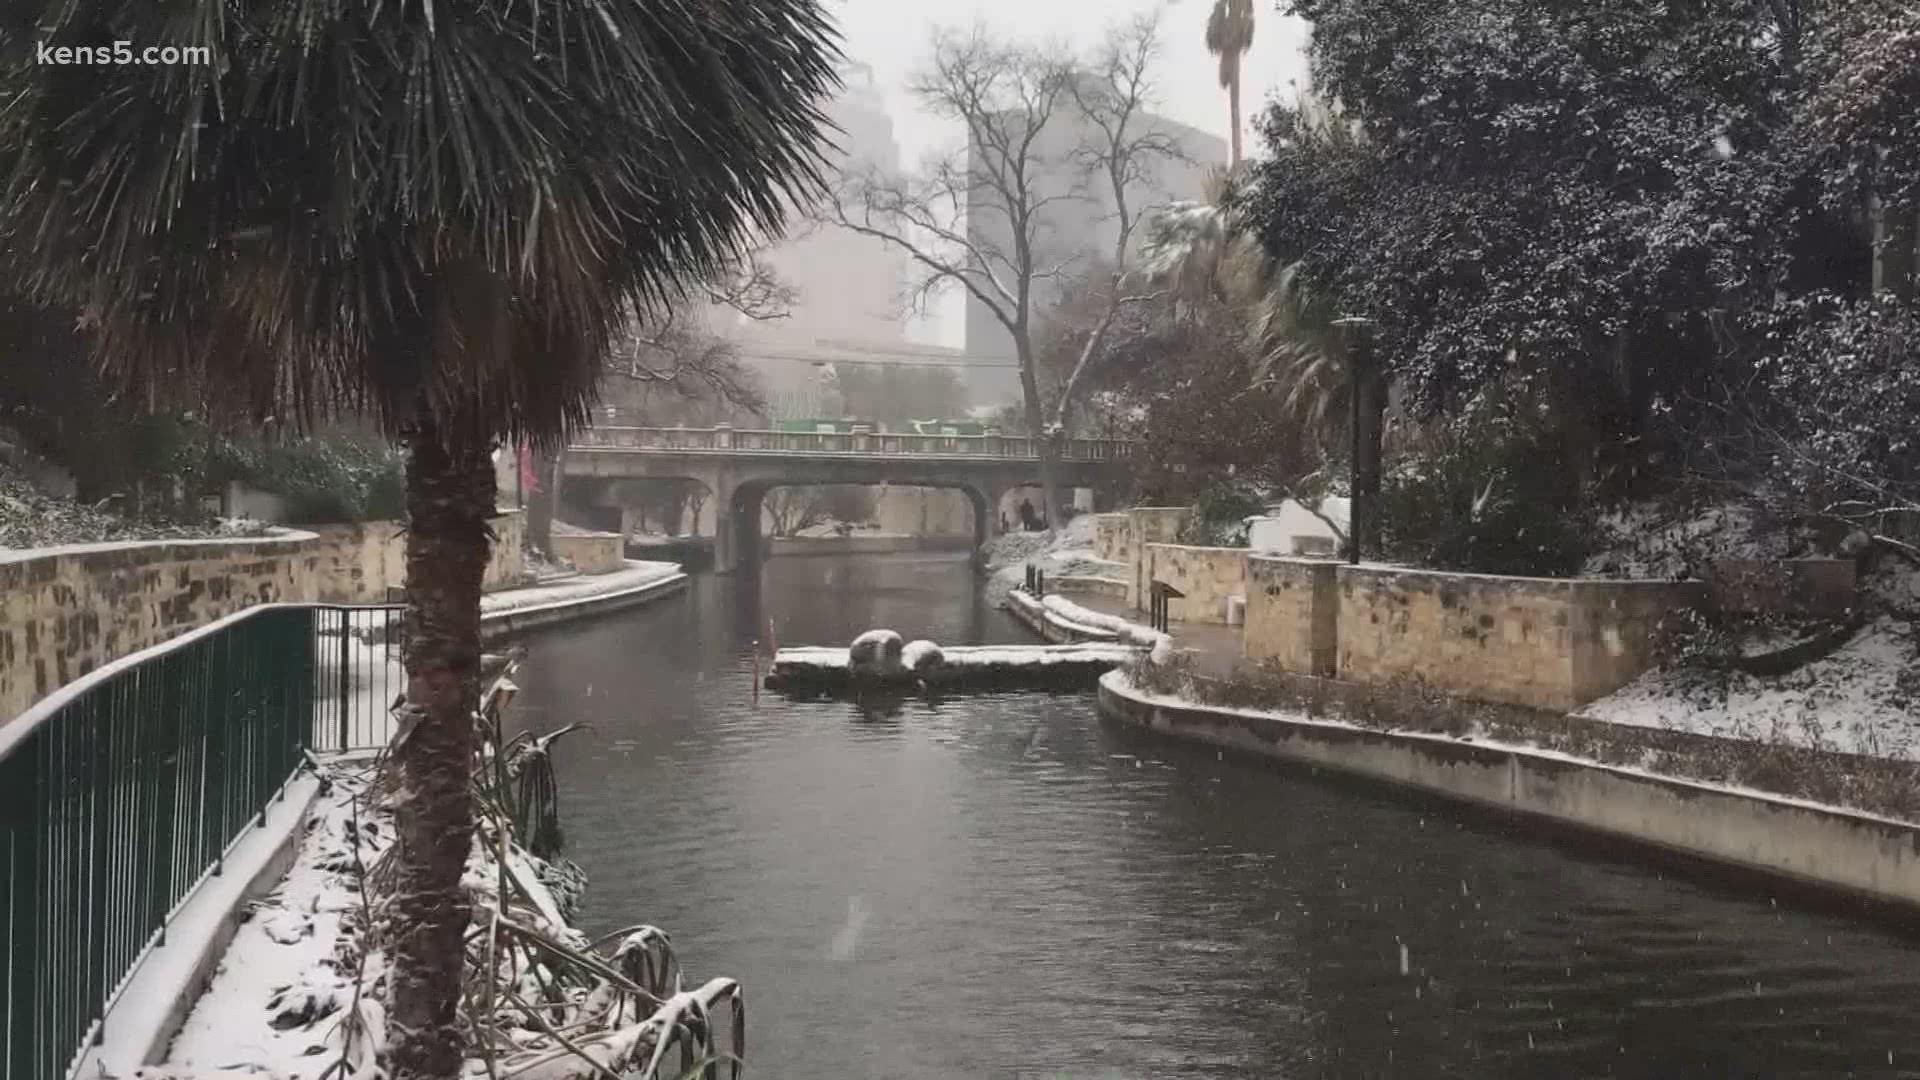 After February’s winter storm, San Antonio's City Council formed a committee to look at what the city can do to better prepare for the next disaster.